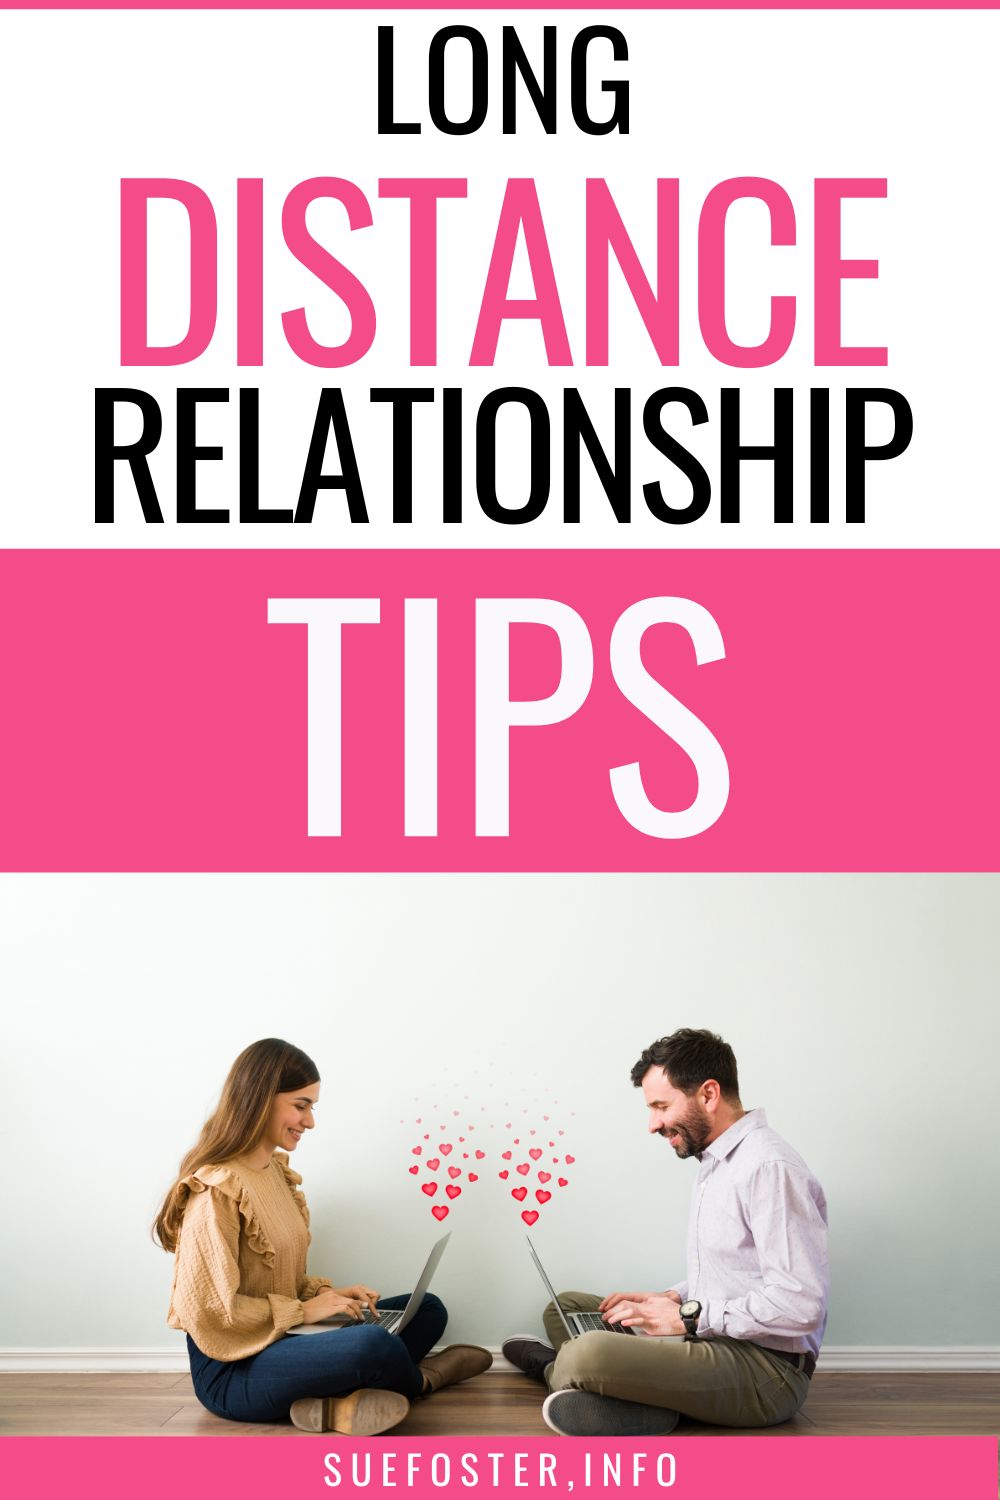 Keeping a long-distance relationship can be challenging but not impossible. Here's how to keep the spark alive in your long-distance relationship.